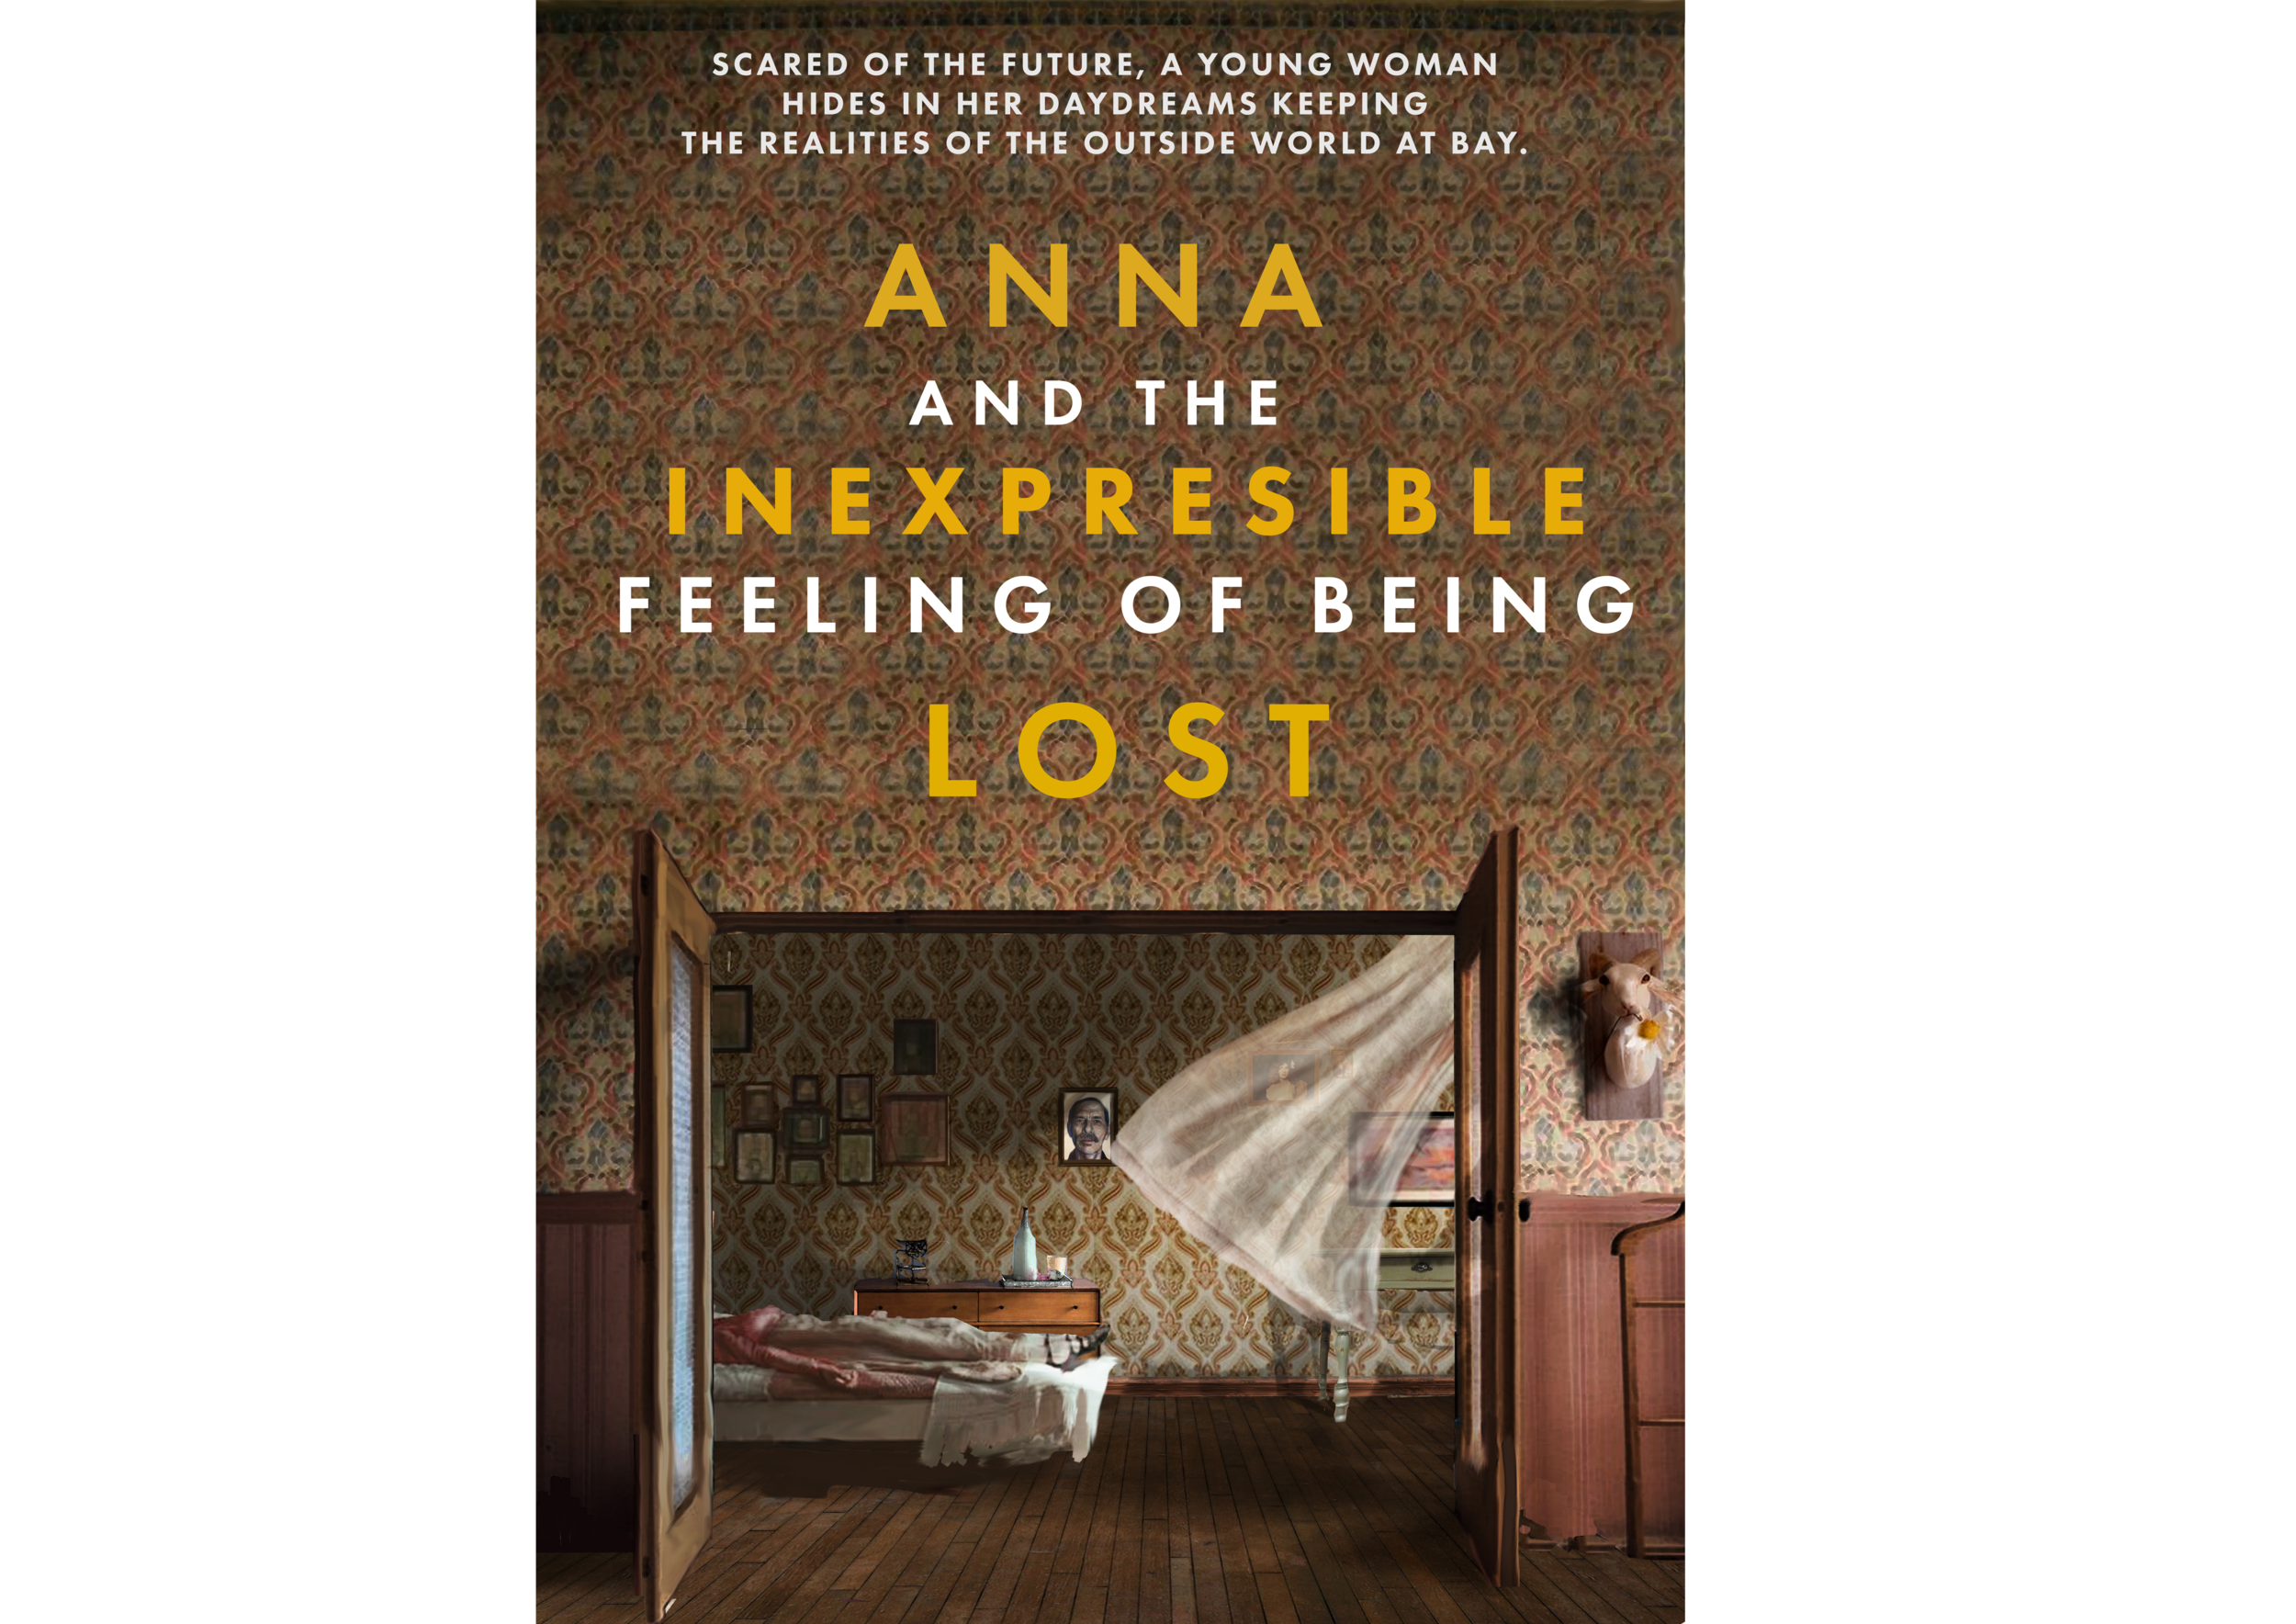 ANNA AND THE INEXPRESSIBLE FEELING OF BEING LOST